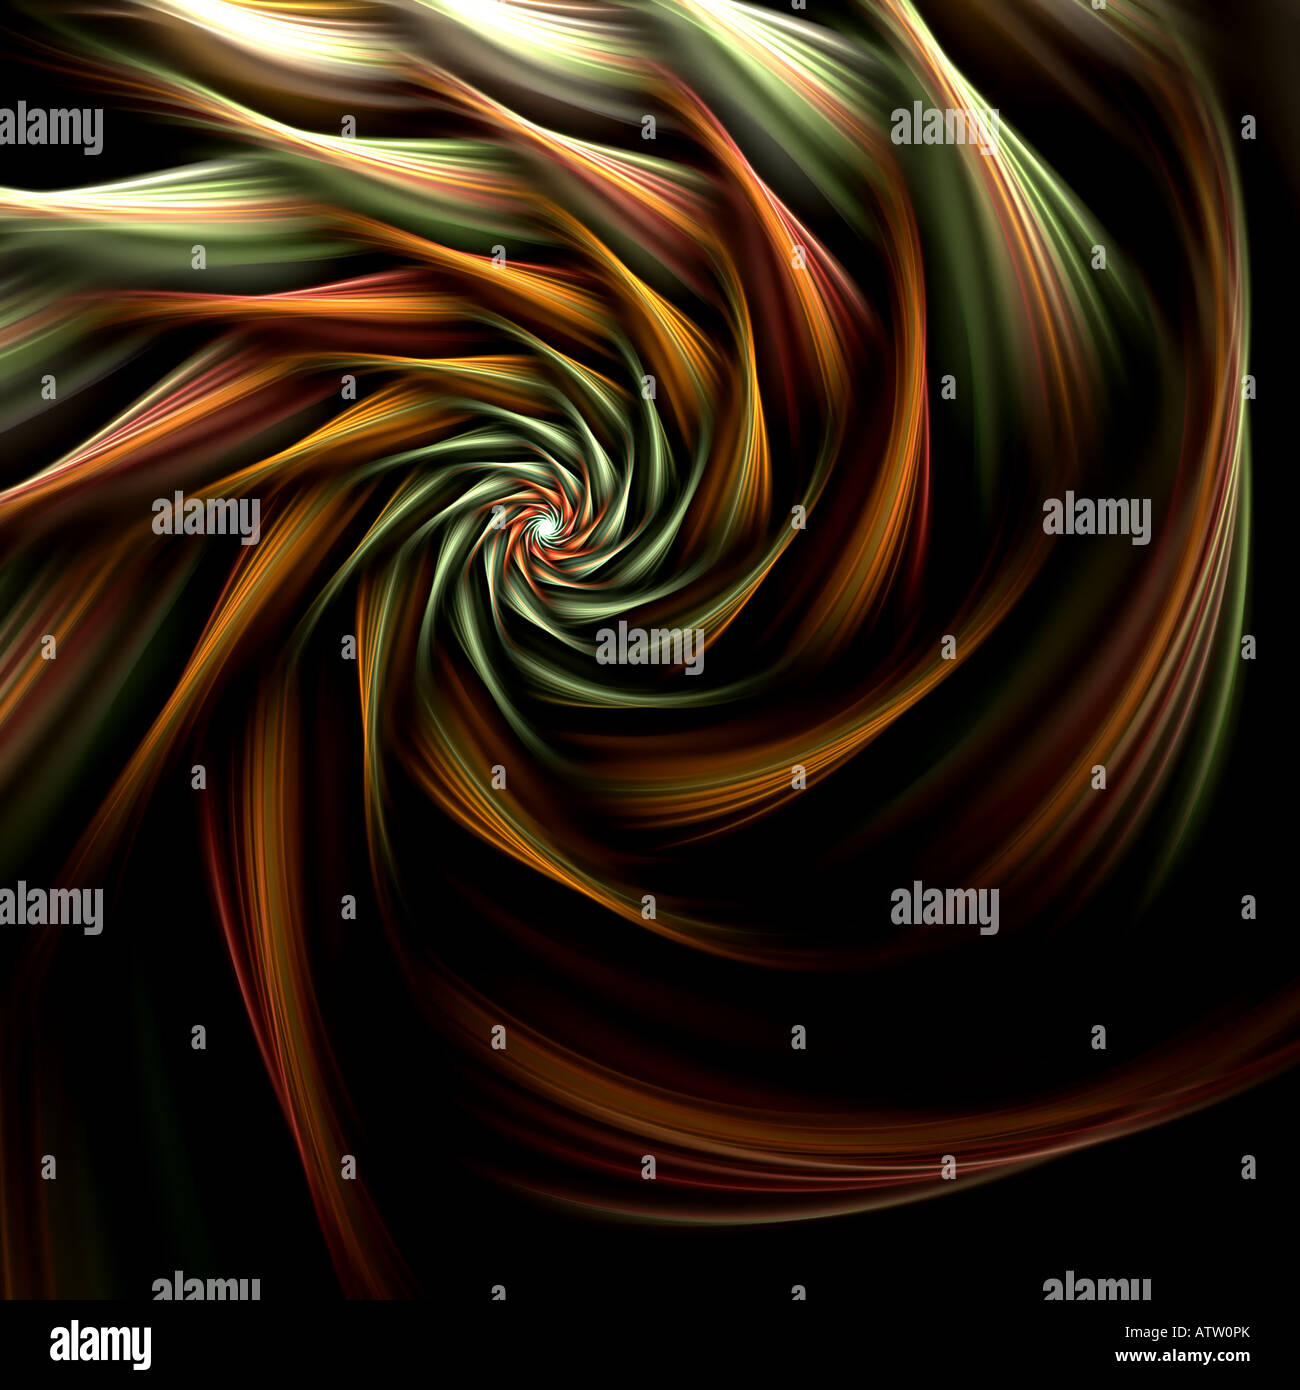 Abstract fractal image resembling a spiral flower Stock Photo